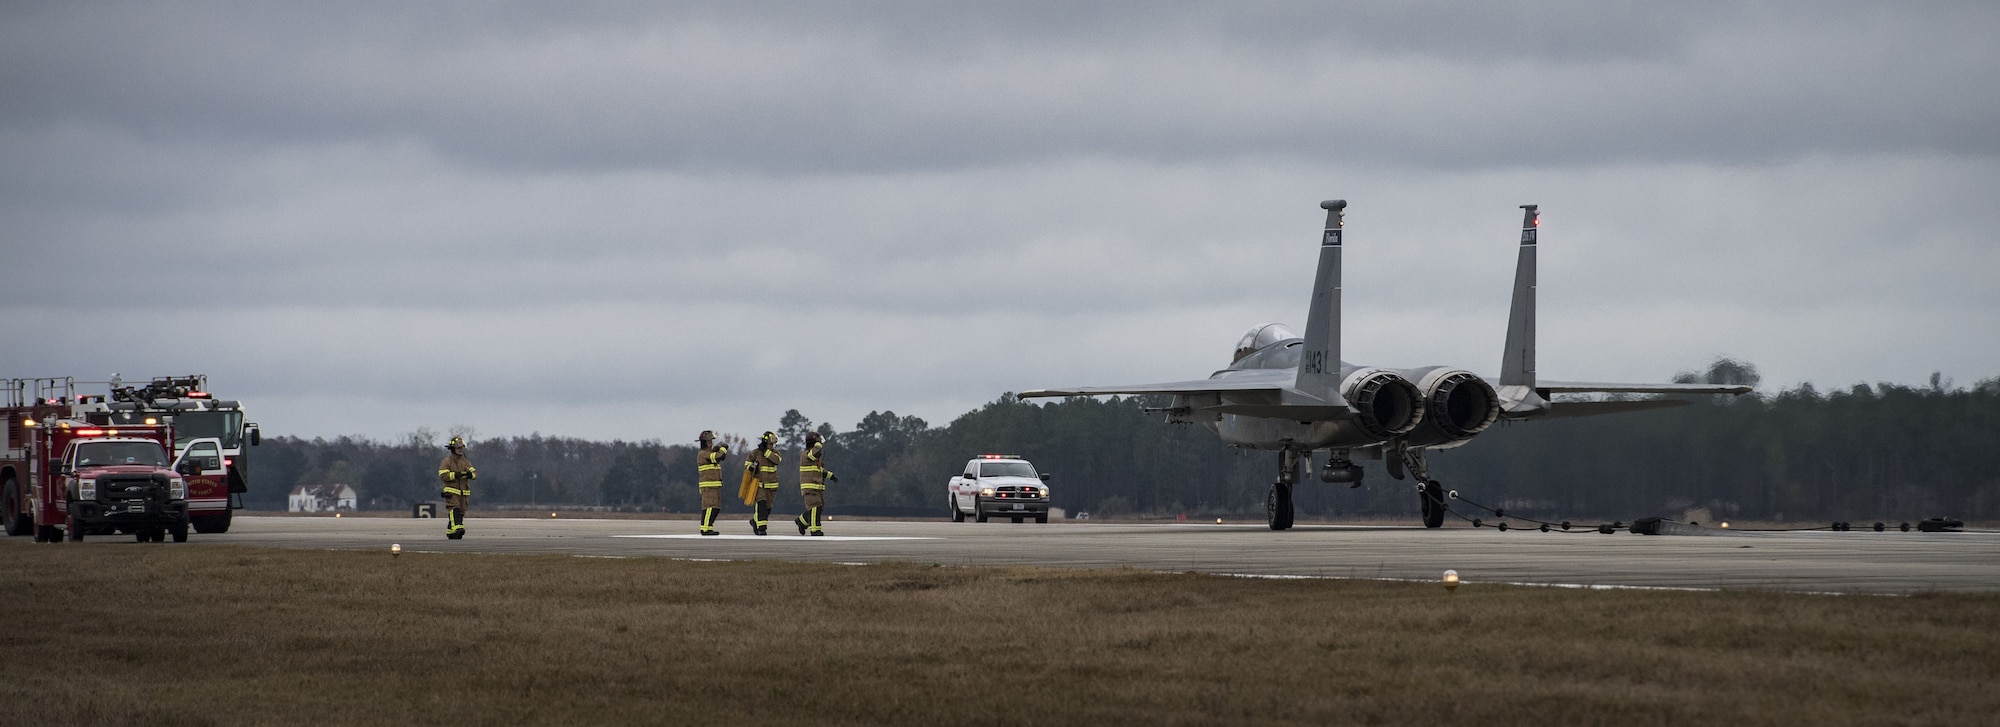 Airmen from the 23d Civil Engineer Squadron prepare to release an F-15C Eagle from an arresting system, Dec. 19, 2017, at Moody Air Force Base, Ga. The BAK-12 arresting system is used on the runway to slow down fighter aircraft in emergency situations. The previous beam has been on Moody’s flightline since 1998, but under new guidelines will now be replaced every 10 years. (U.S. Air Force photo by Senior Airman Janiqua P. Robinson)